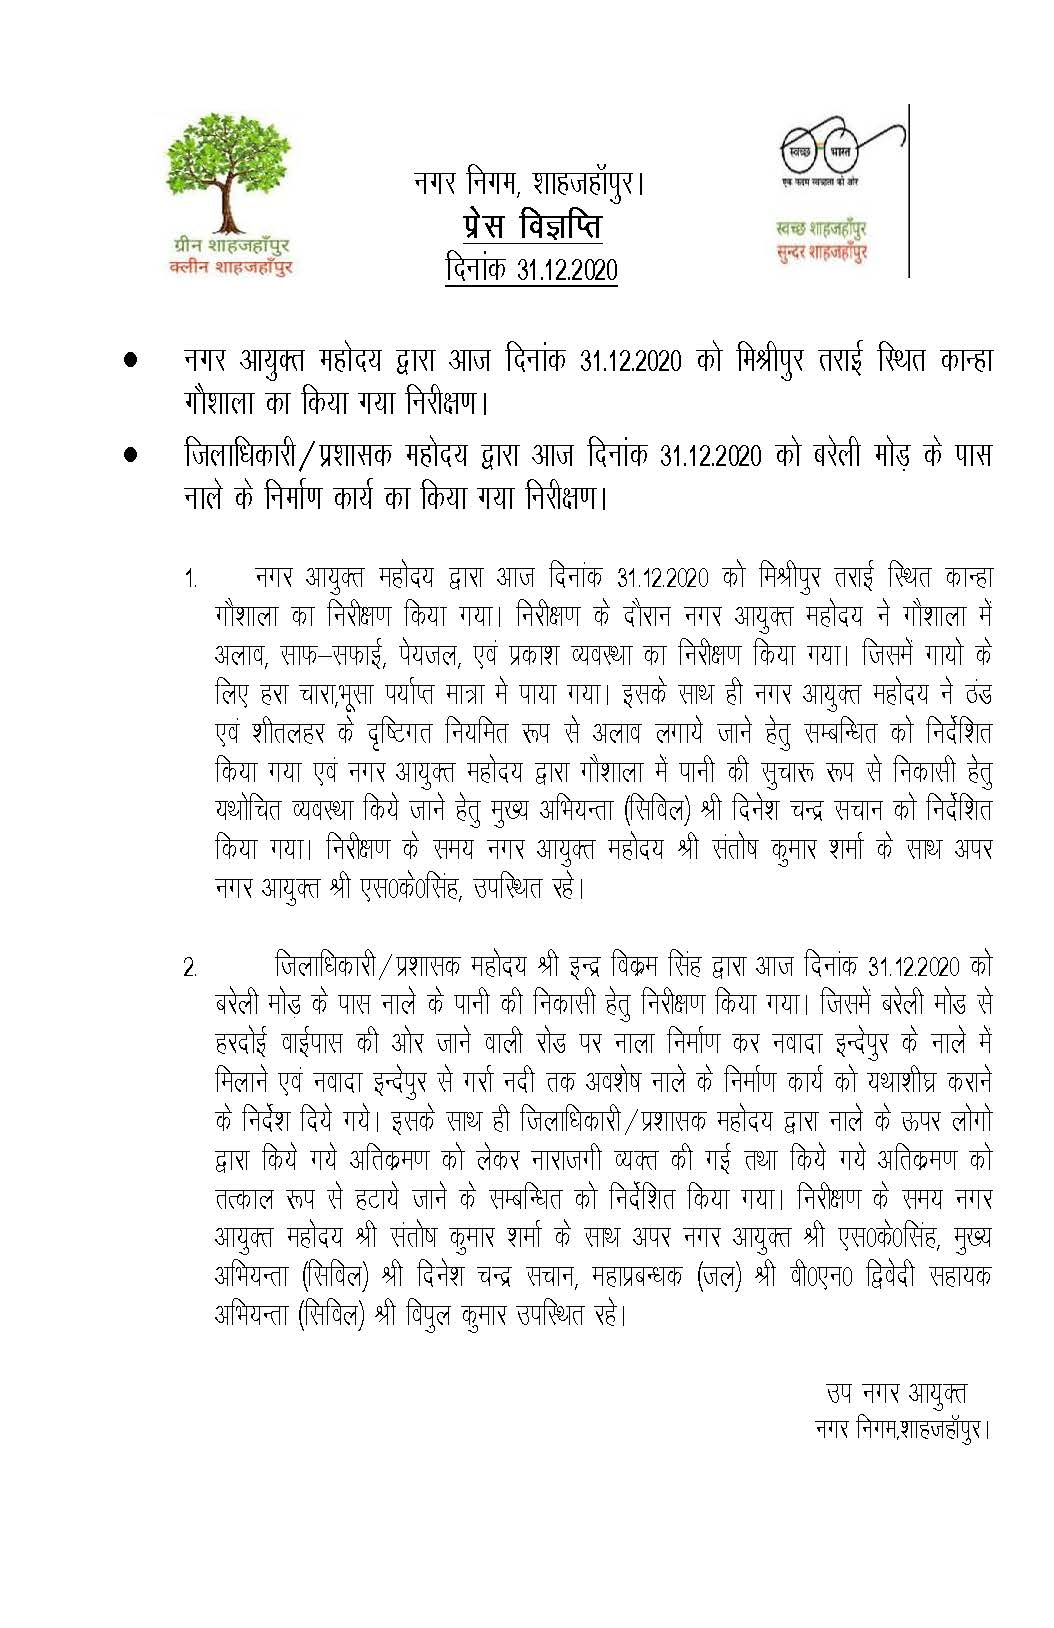 Regarding inspection carried out by Municipal Commissioner of Kanha Cow Shed and under construction drain near Bareilly turn on 31.12.2020